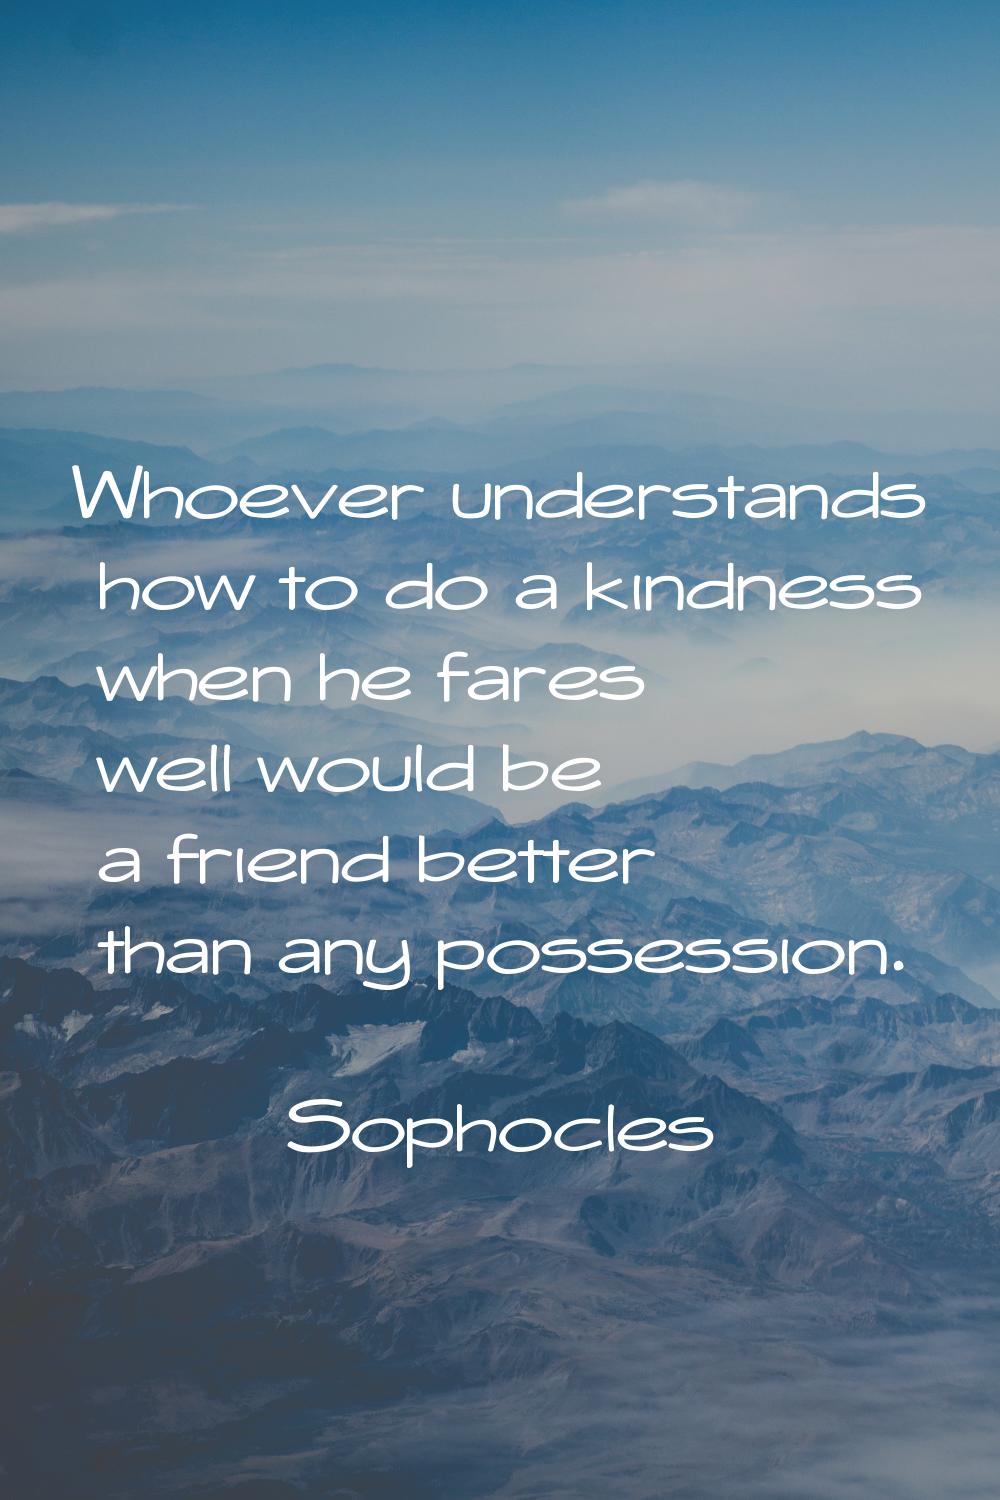 Whoever understands how to do a kindness when he fares well would be a friend better than any posse